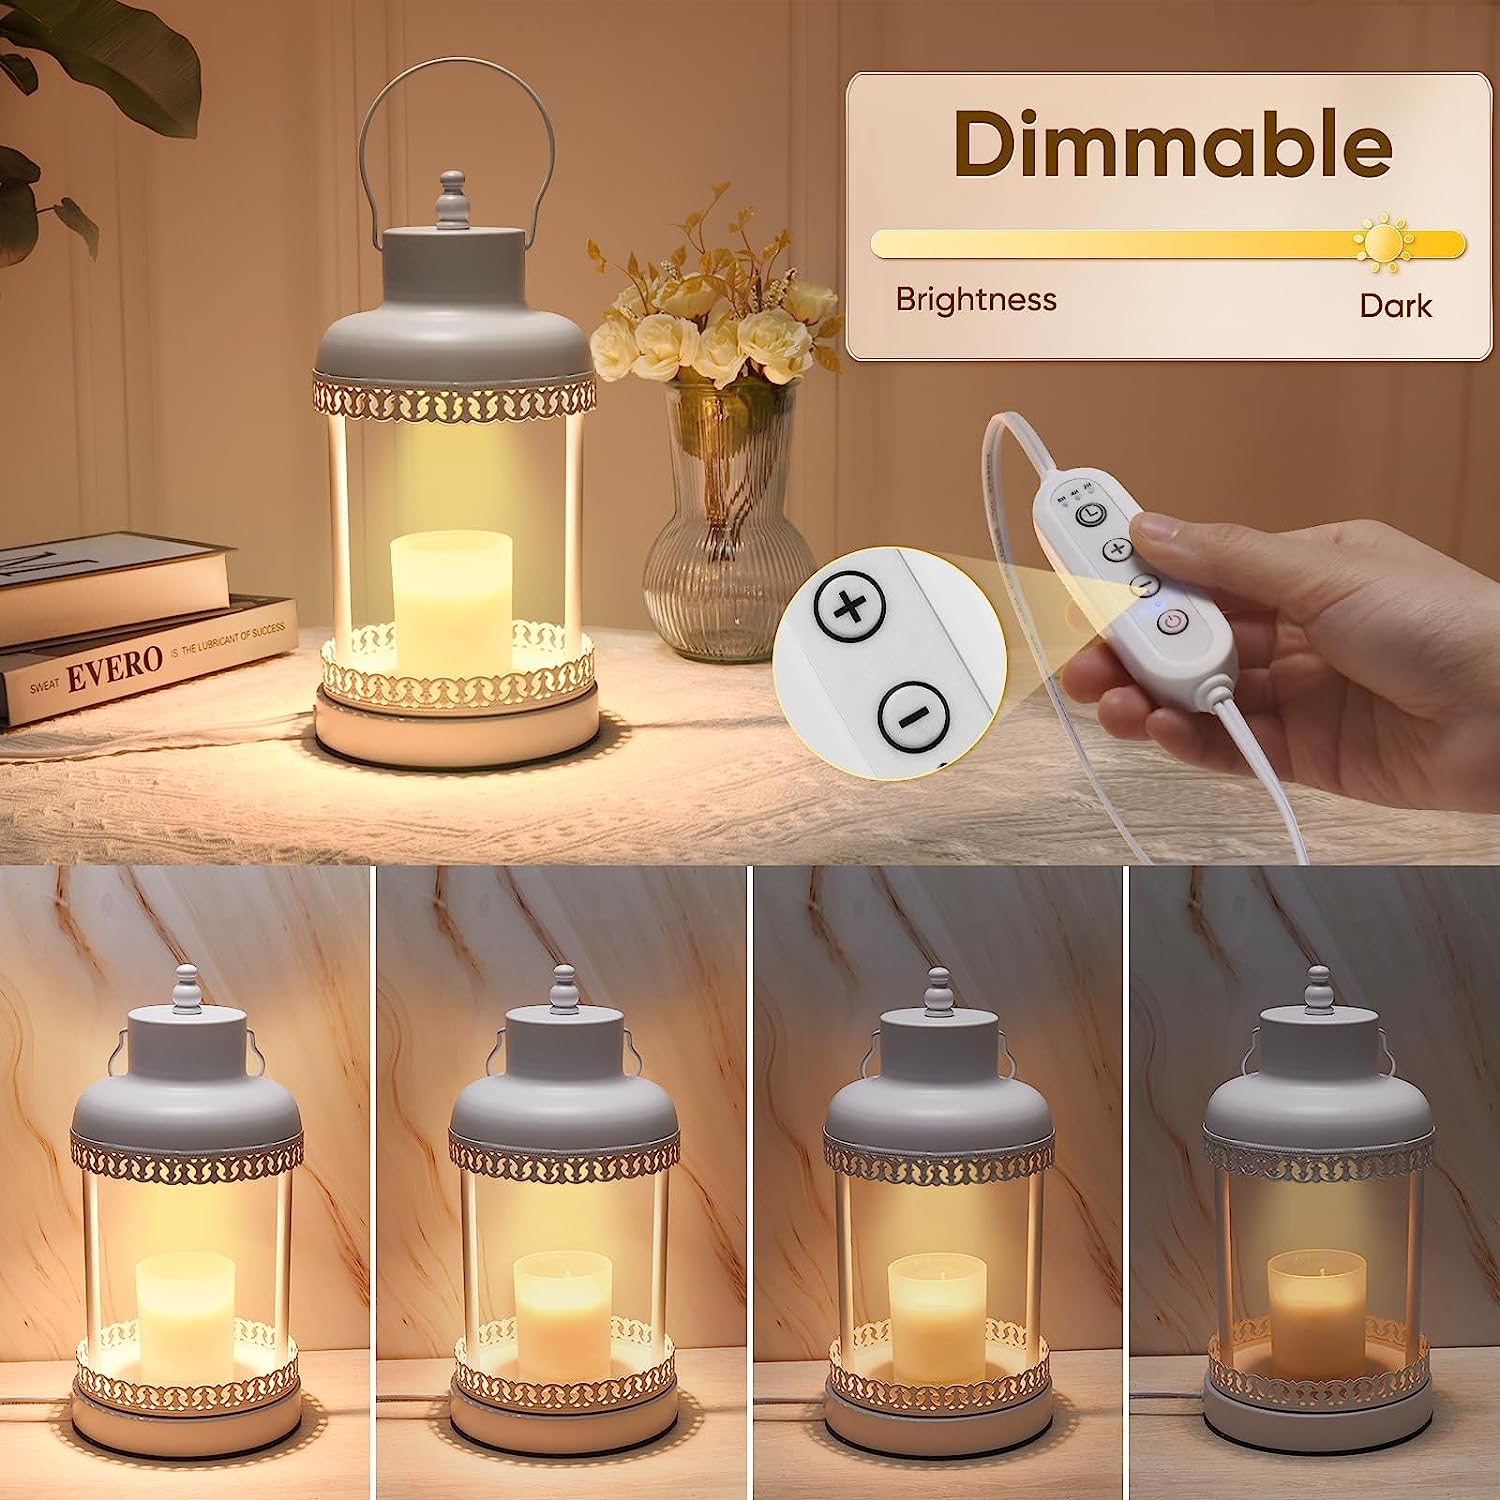 Candle Warmer Lamp, Electric Candle Warmer Lamp with Timer Dimmer, Candle Warmer Lamp for Jar Candles with 2 Bulbs, Safety Candle Melting Lamp Wax Melt